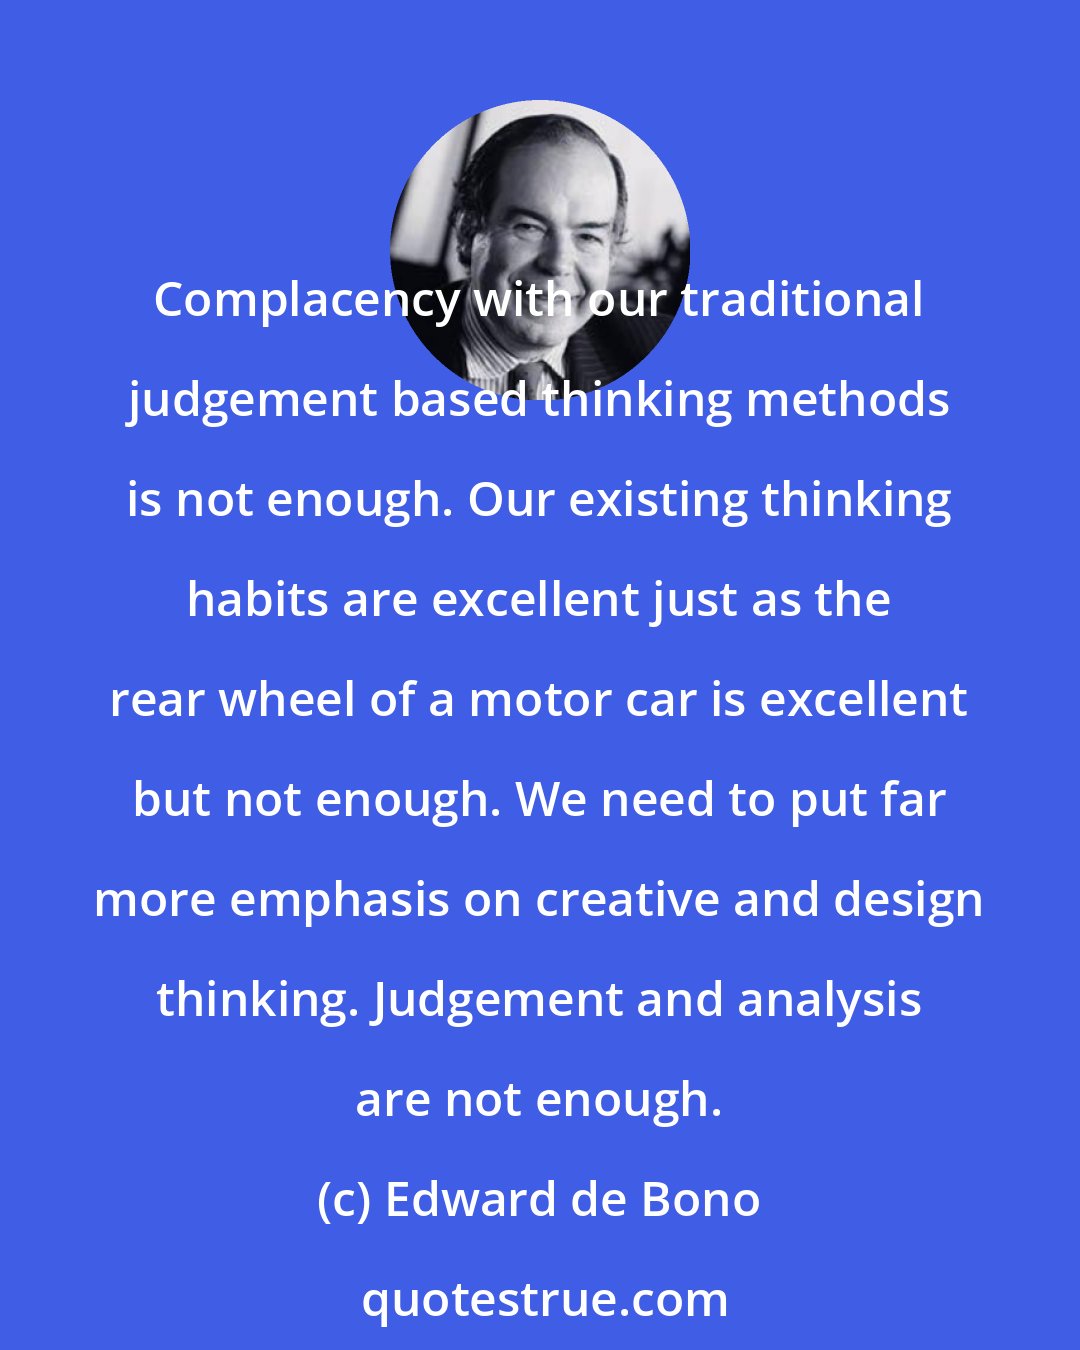 Edward de Bono: Complacency with our traditional judgement based thinking methods is not enough. Our existing thinking habits are excellent just as the rear wheel of a motor car is excellent but not enough. We need to put far more emphasis on creative and design thinking. Judgement and analysis are not enough.